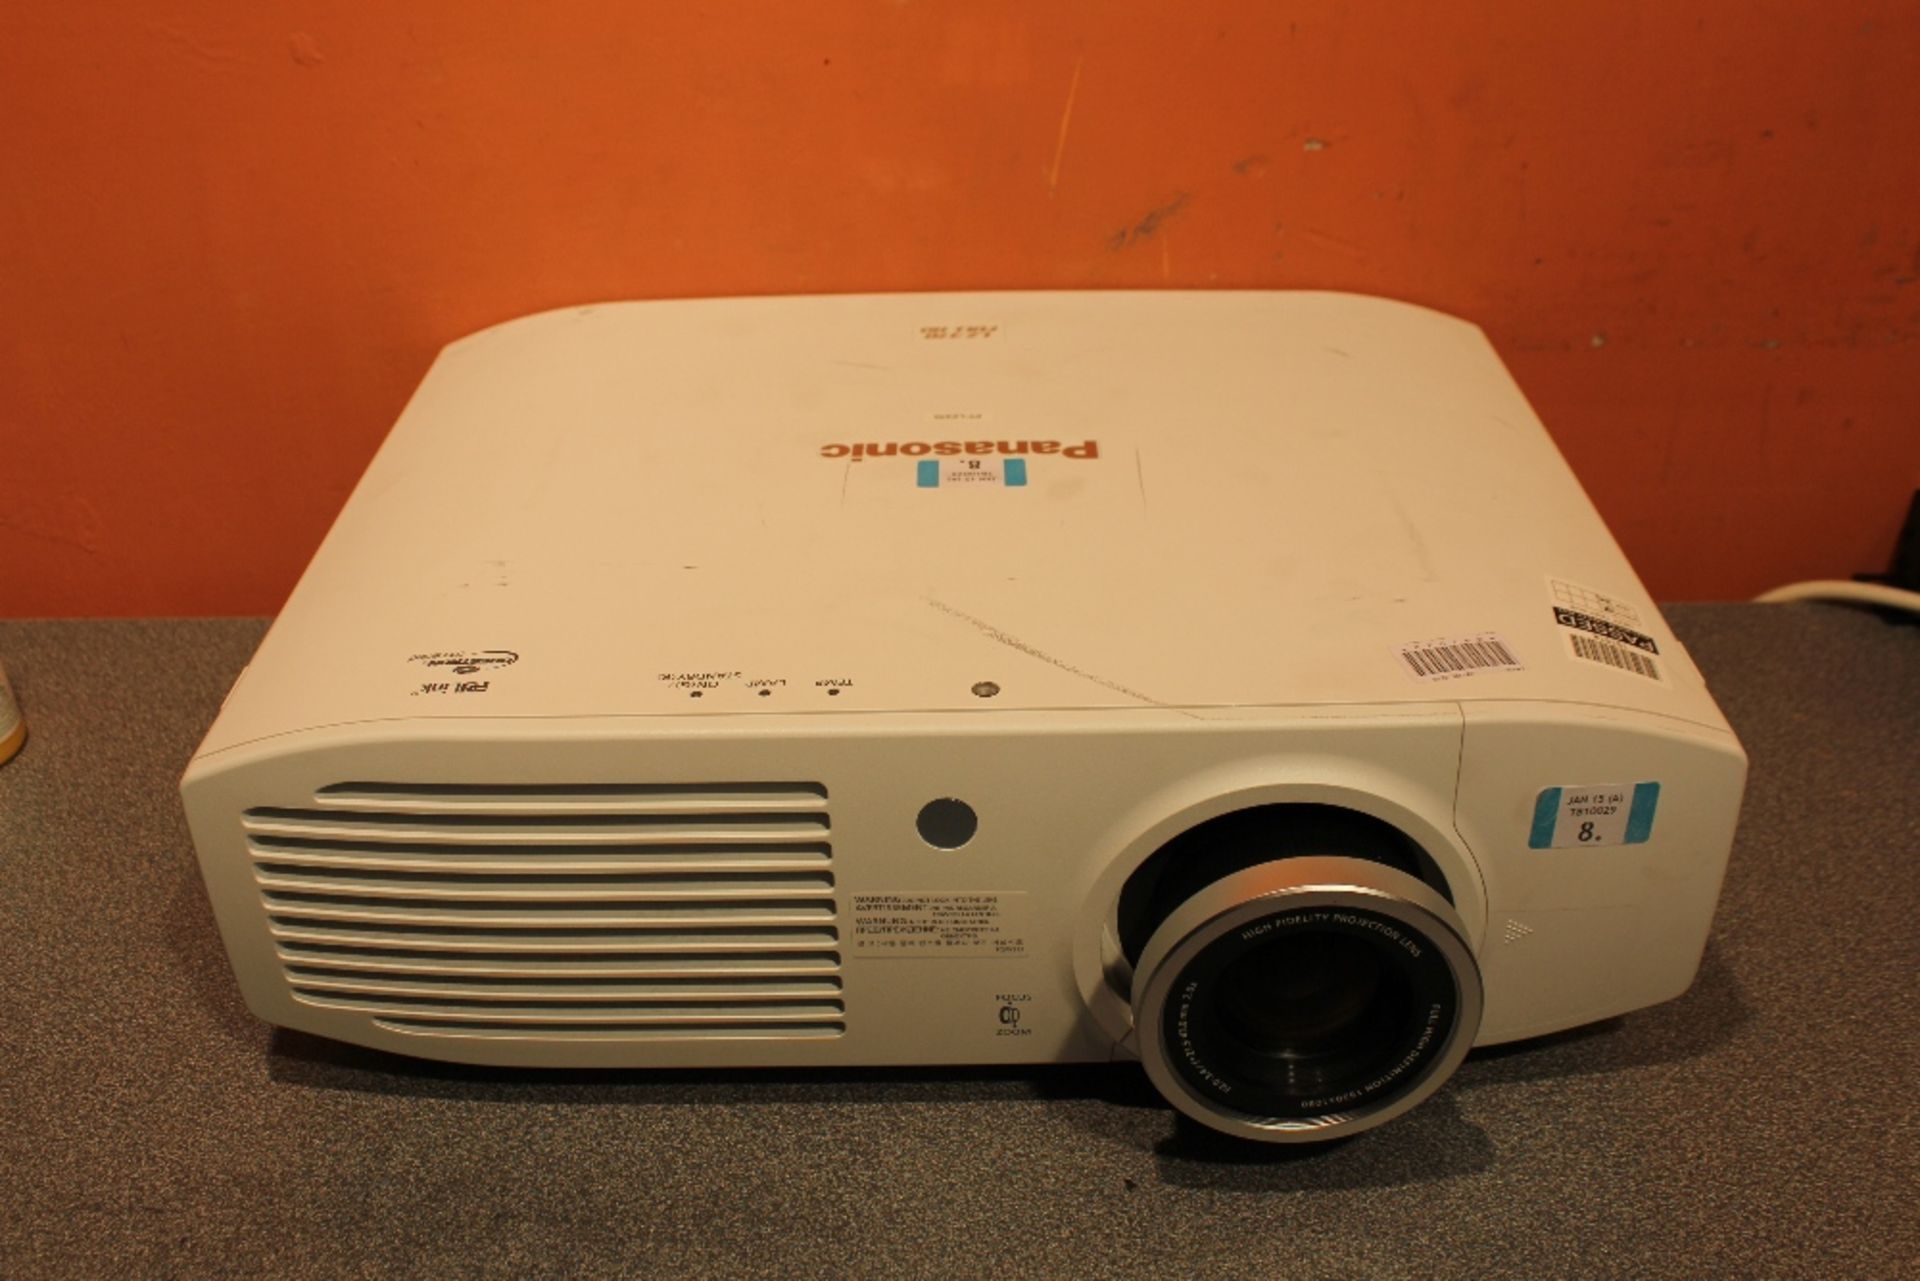 PANASONIC  PT-LZ370 Projector - FULL HD - 2 HDMI Inputs  - Powers On Displays An Image Over £2800